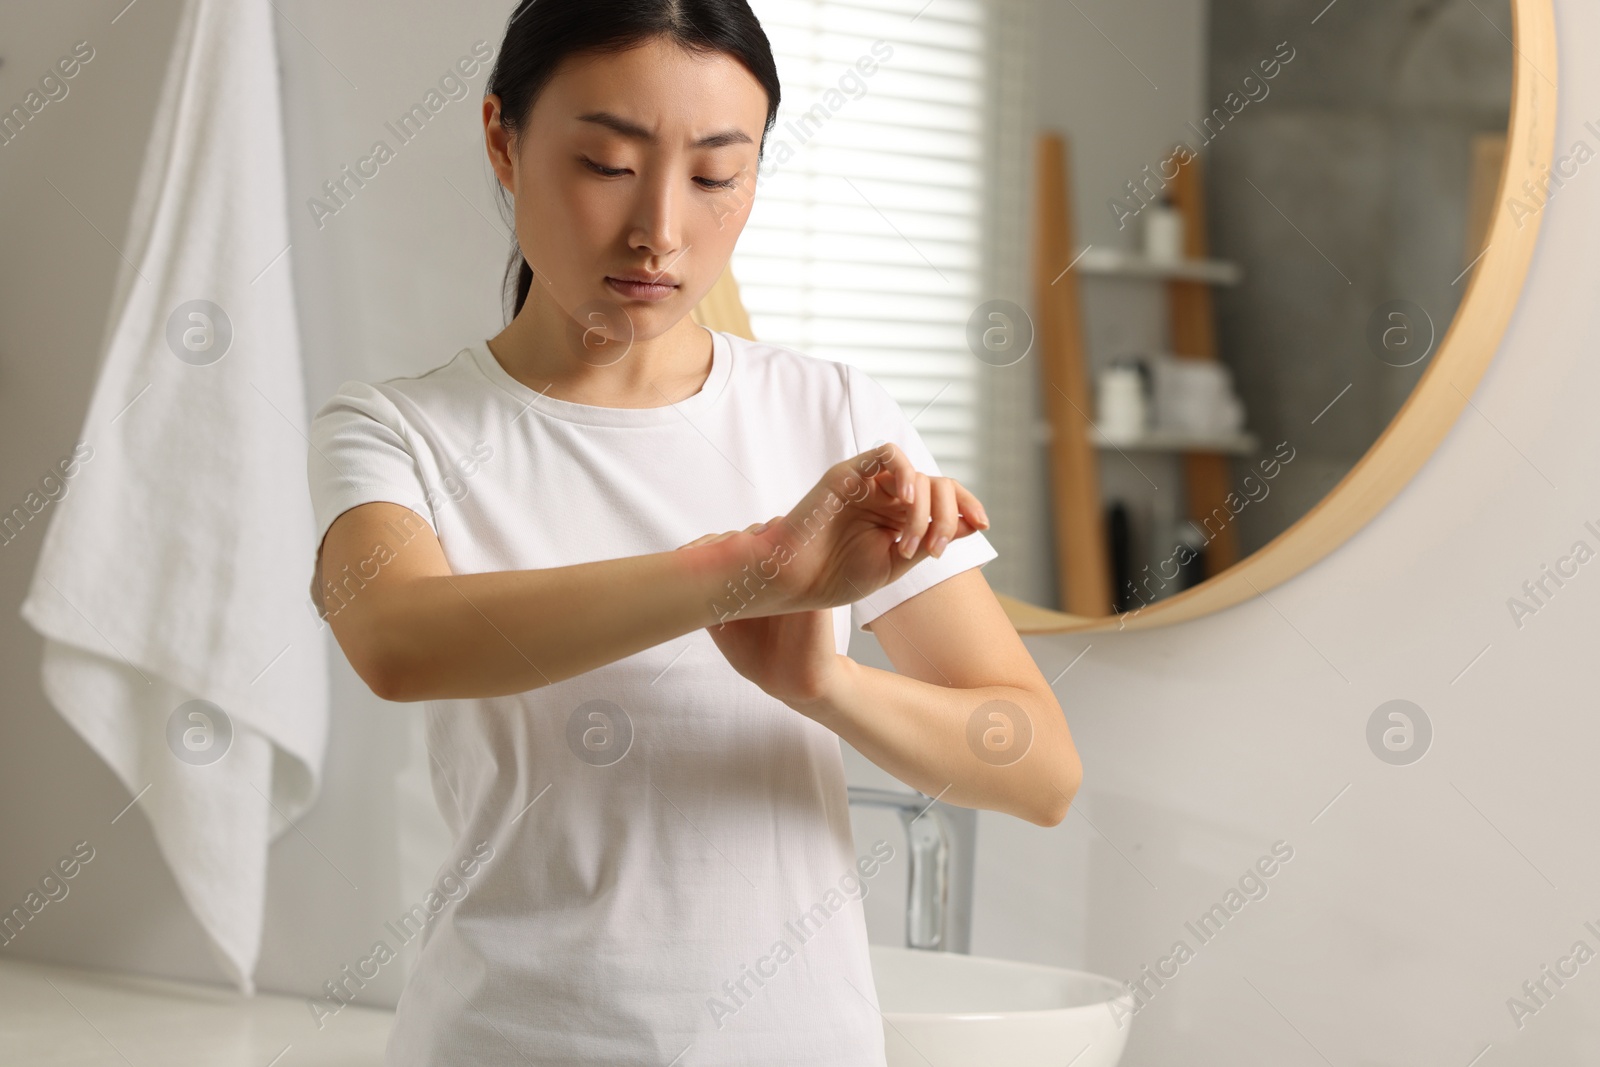 Photo of Suffering from allergy. Young woman scratching her arm in bathroom